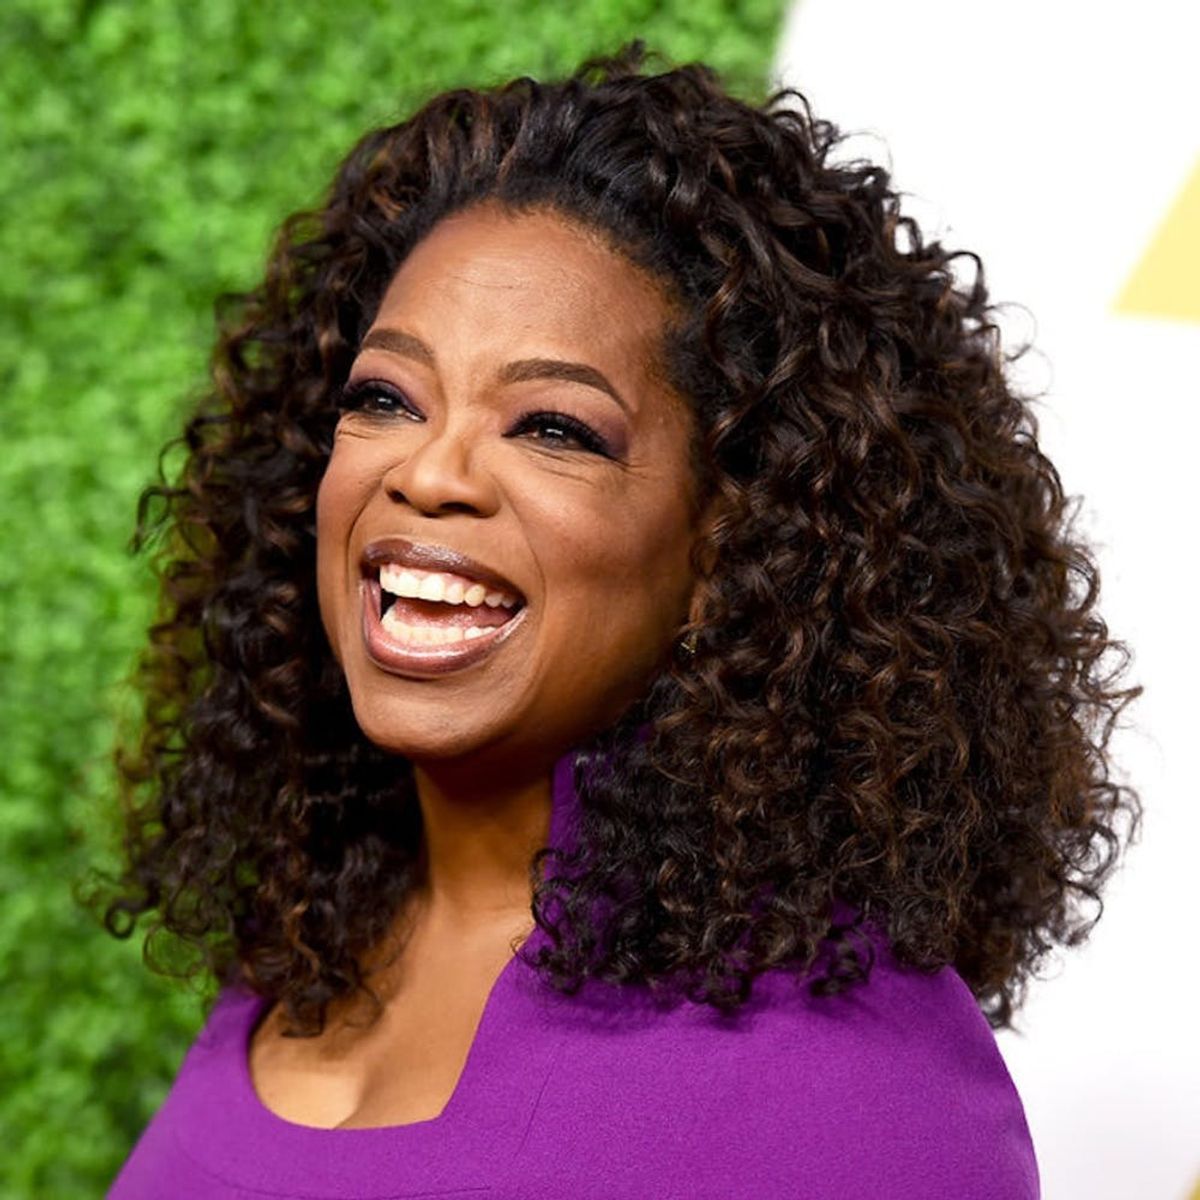 Oprah Is Releasing a New Line of Health-Conscious Soups and Sides